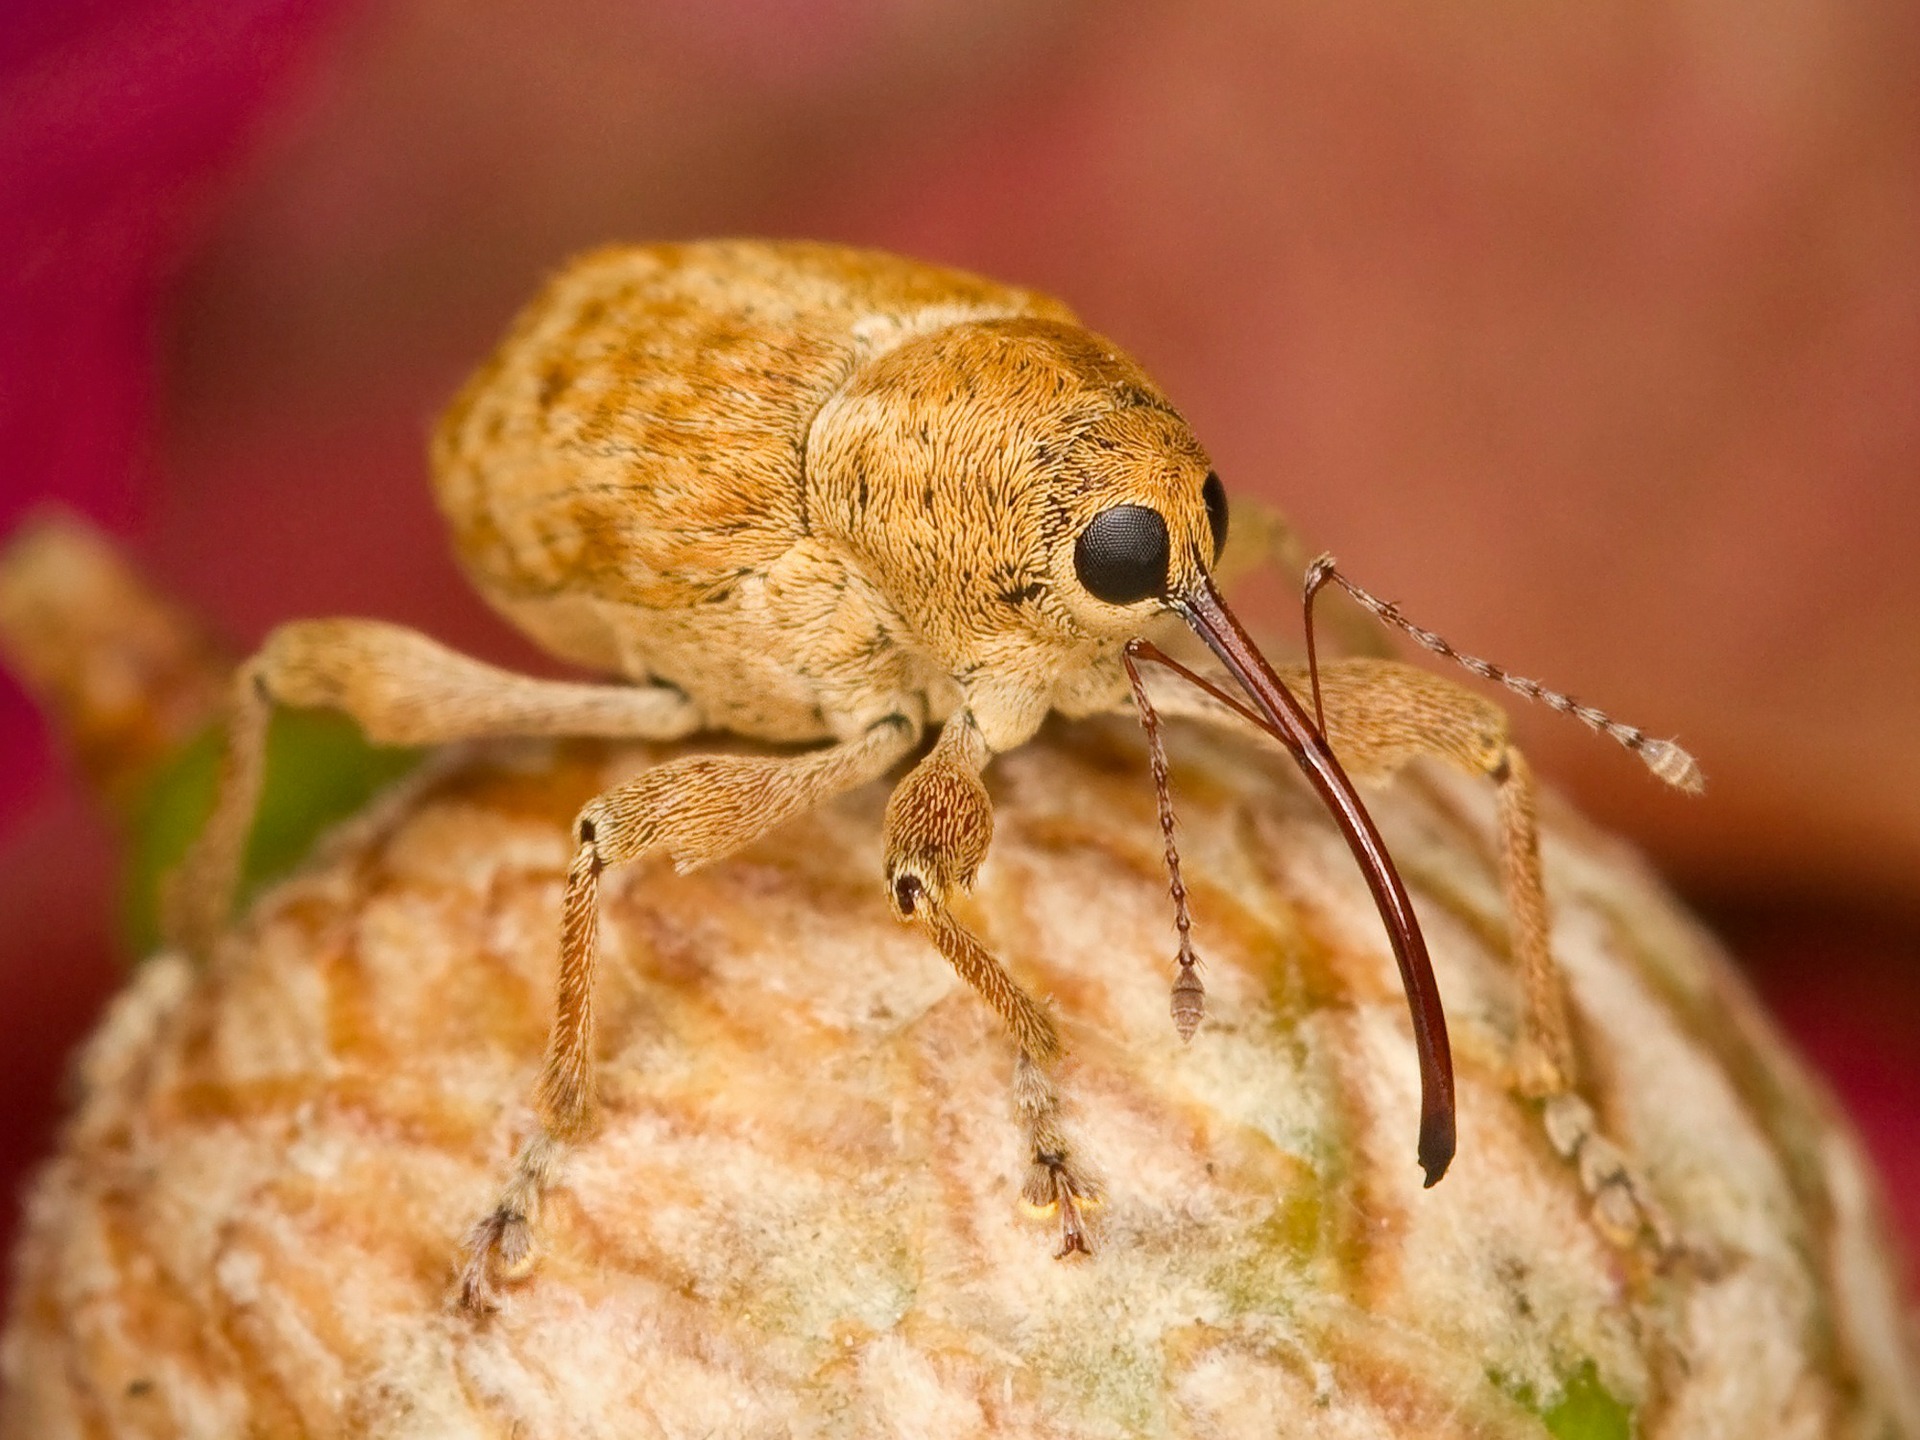 Filbert Weevil, Animal, Filbert, Insect, Nature, HQ Photo